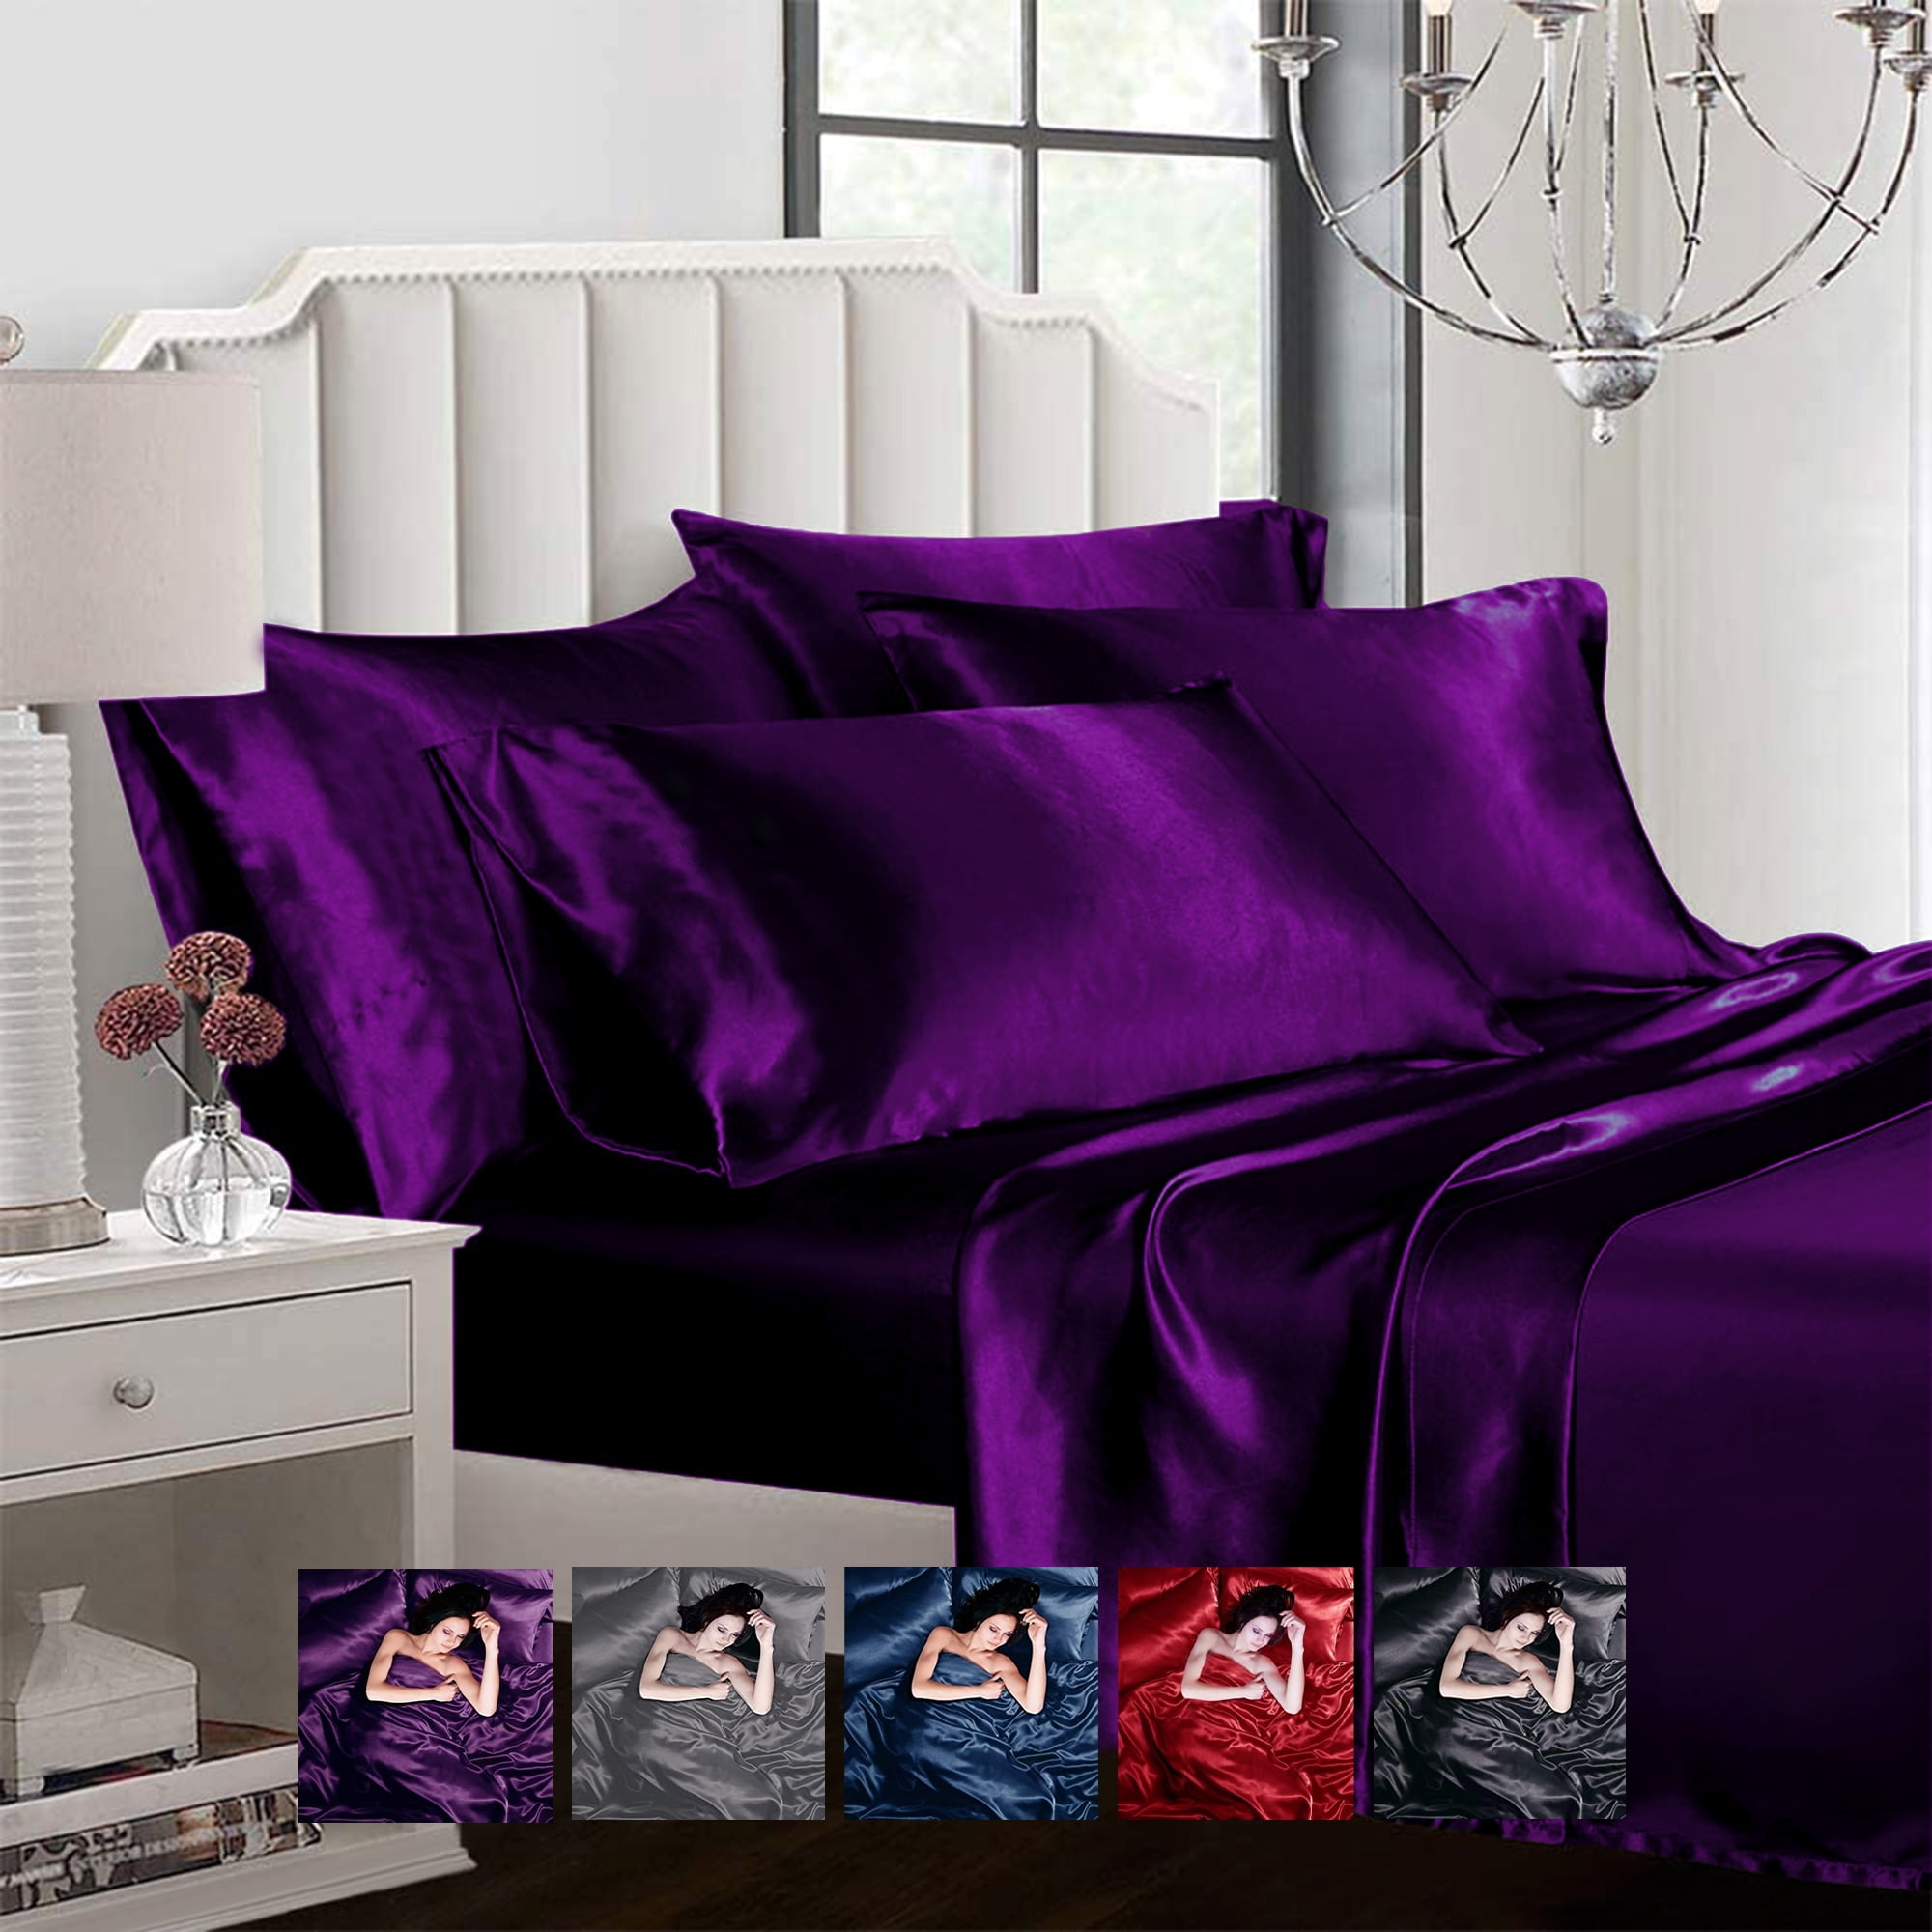 NEW Fancy collection 4 pc Satin Sheet set Super soft New Queen Hot Pink 